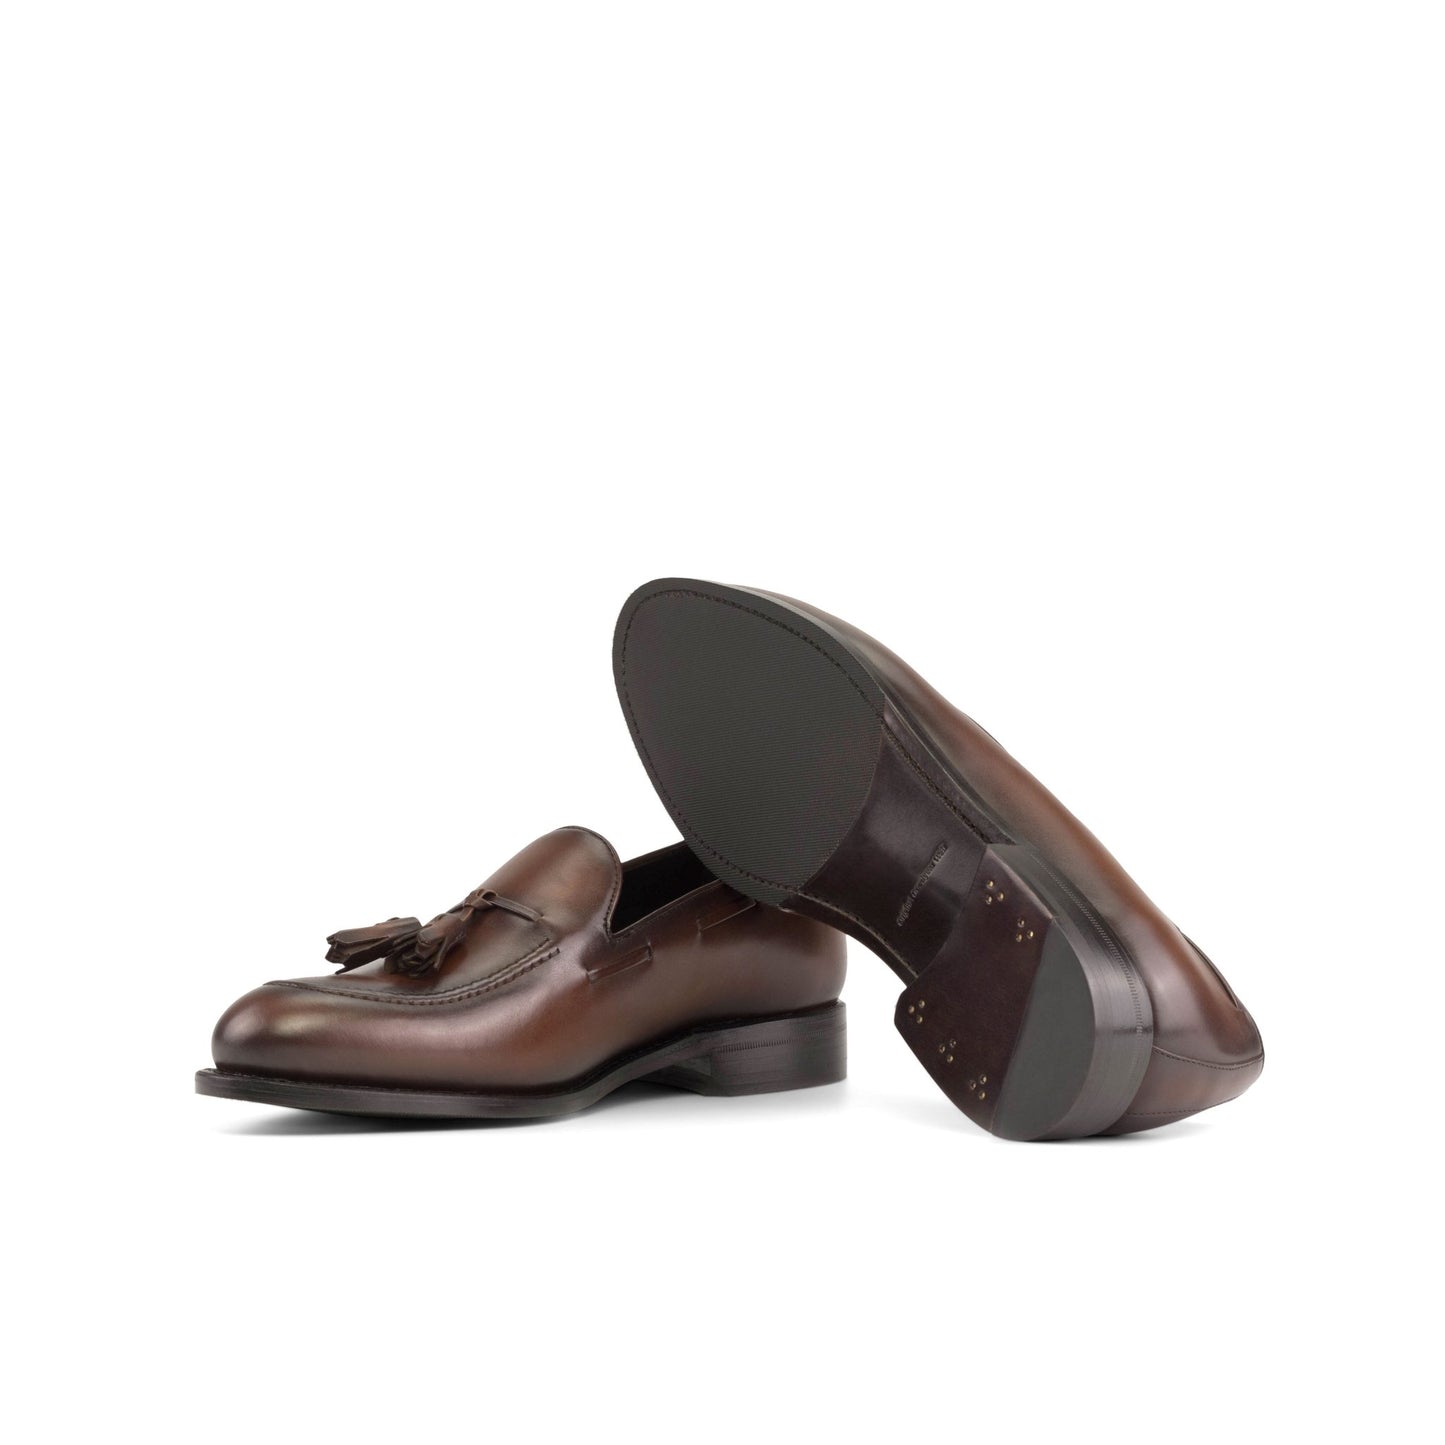 Tassel Loafer in Medium Brown Burnished Box Calf - Zatorres | Free Shipping on orders over $200